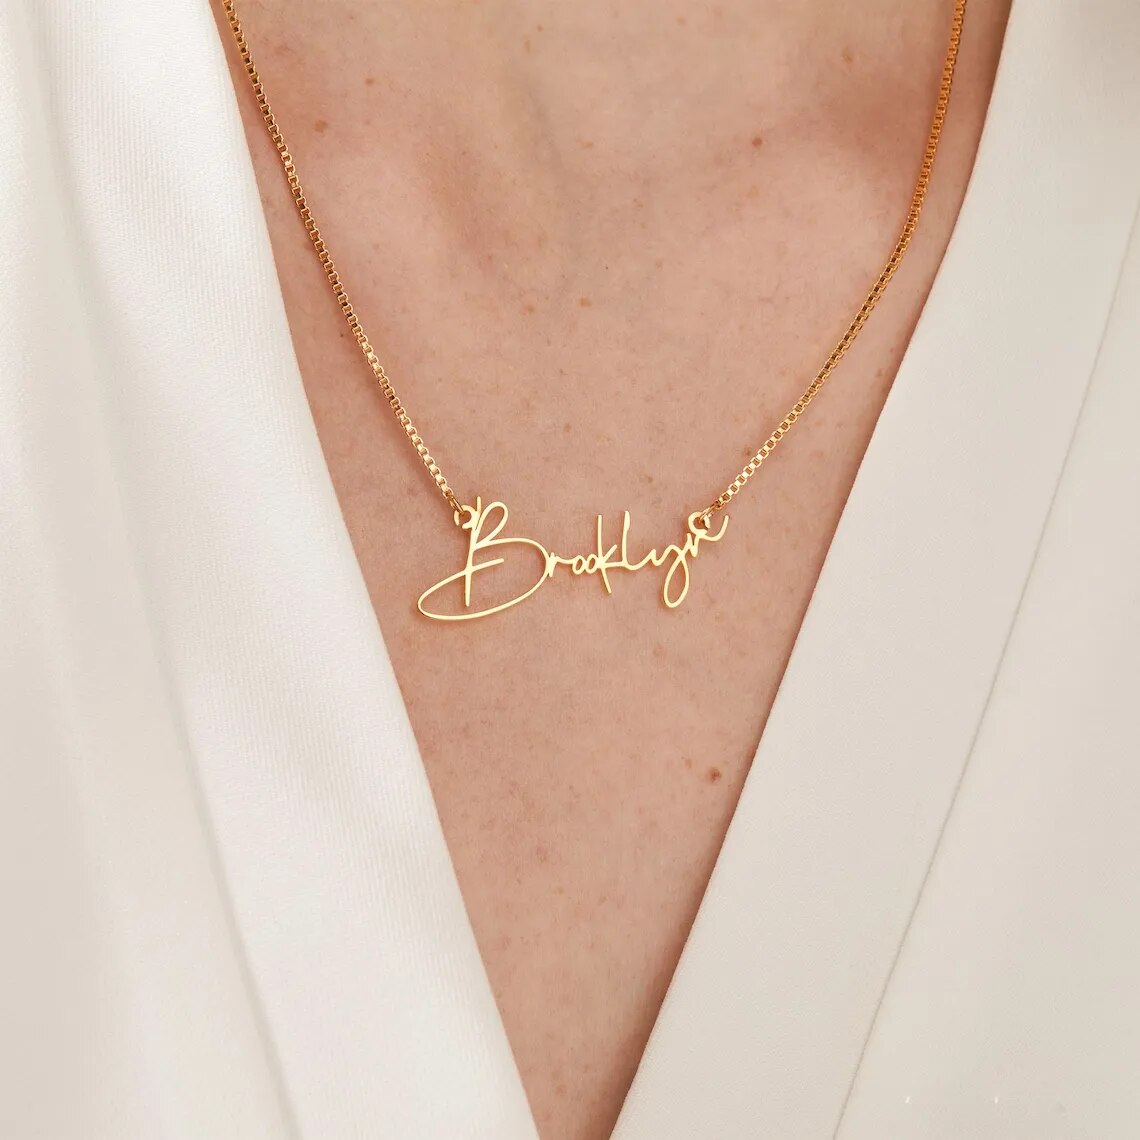 Elegant Personalized Gold Name Necklace